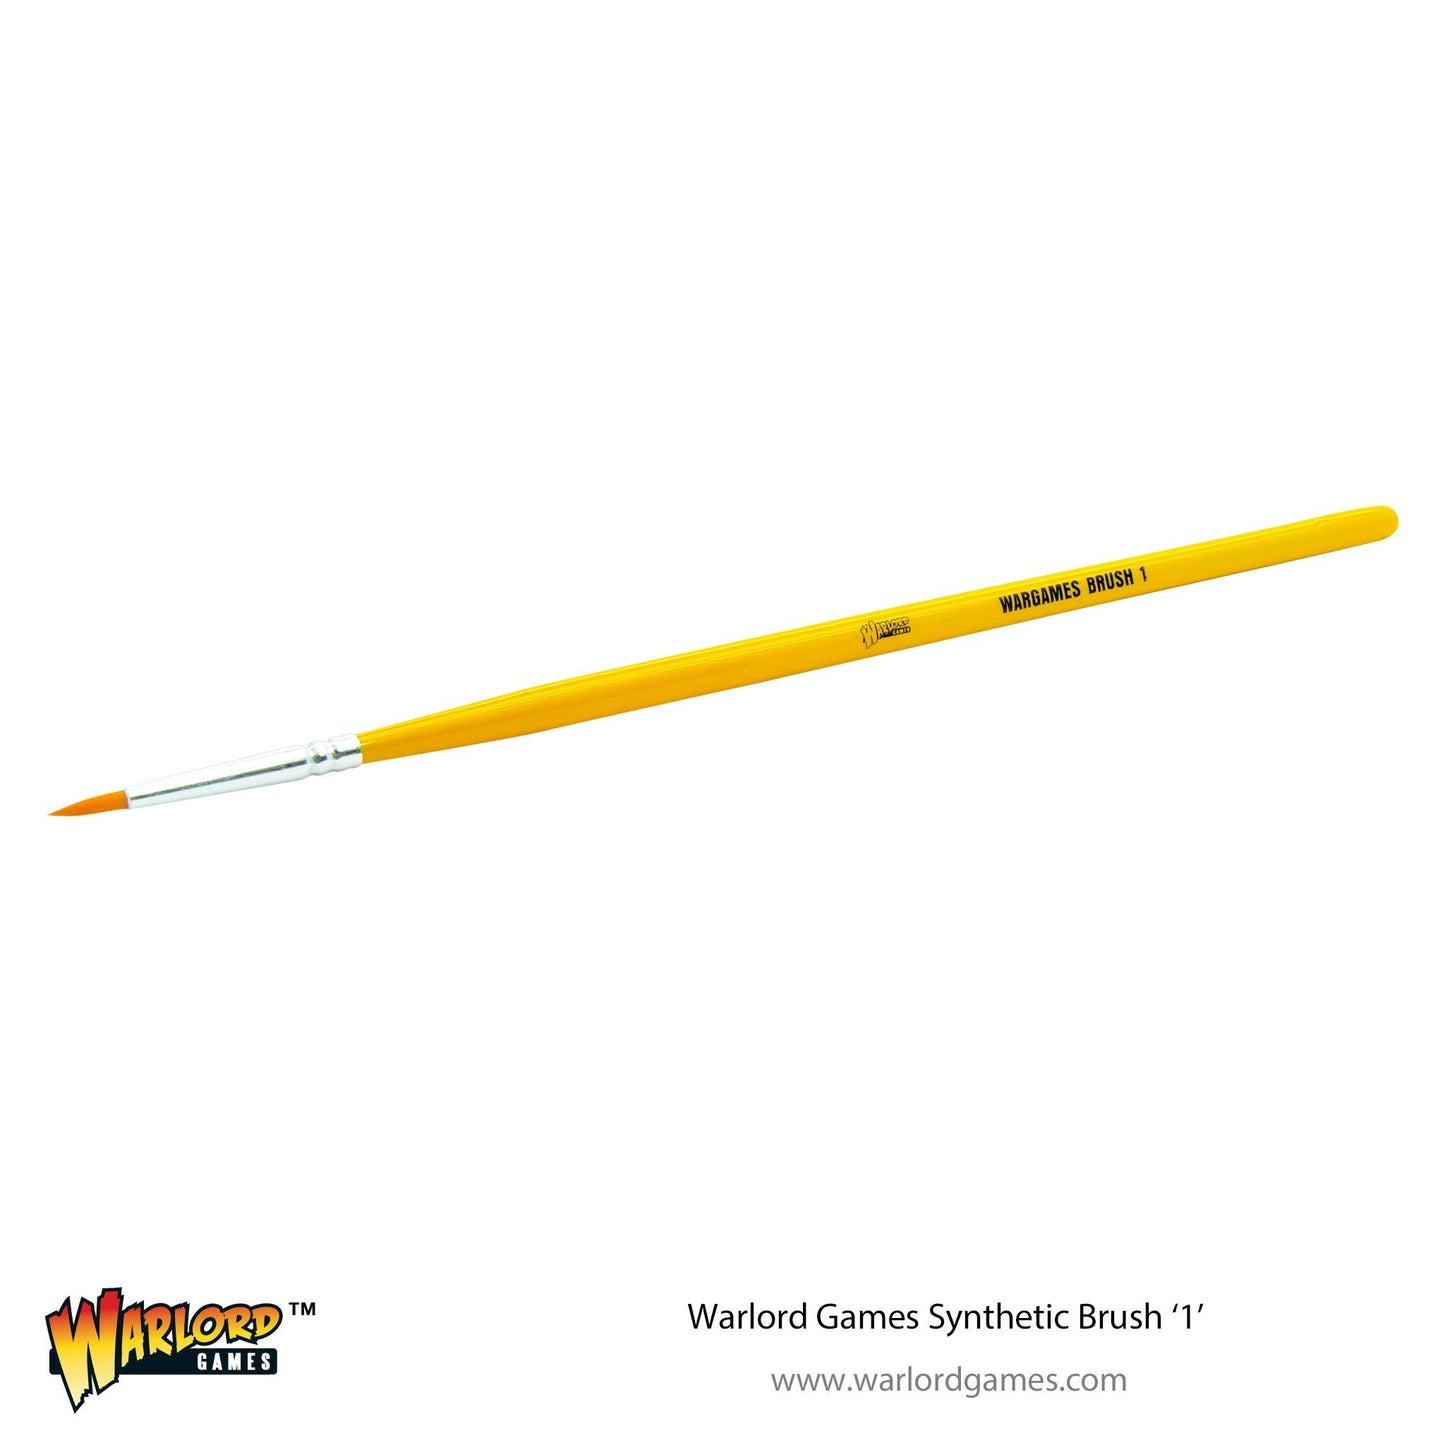 Warlord Games Synthetic Brushes